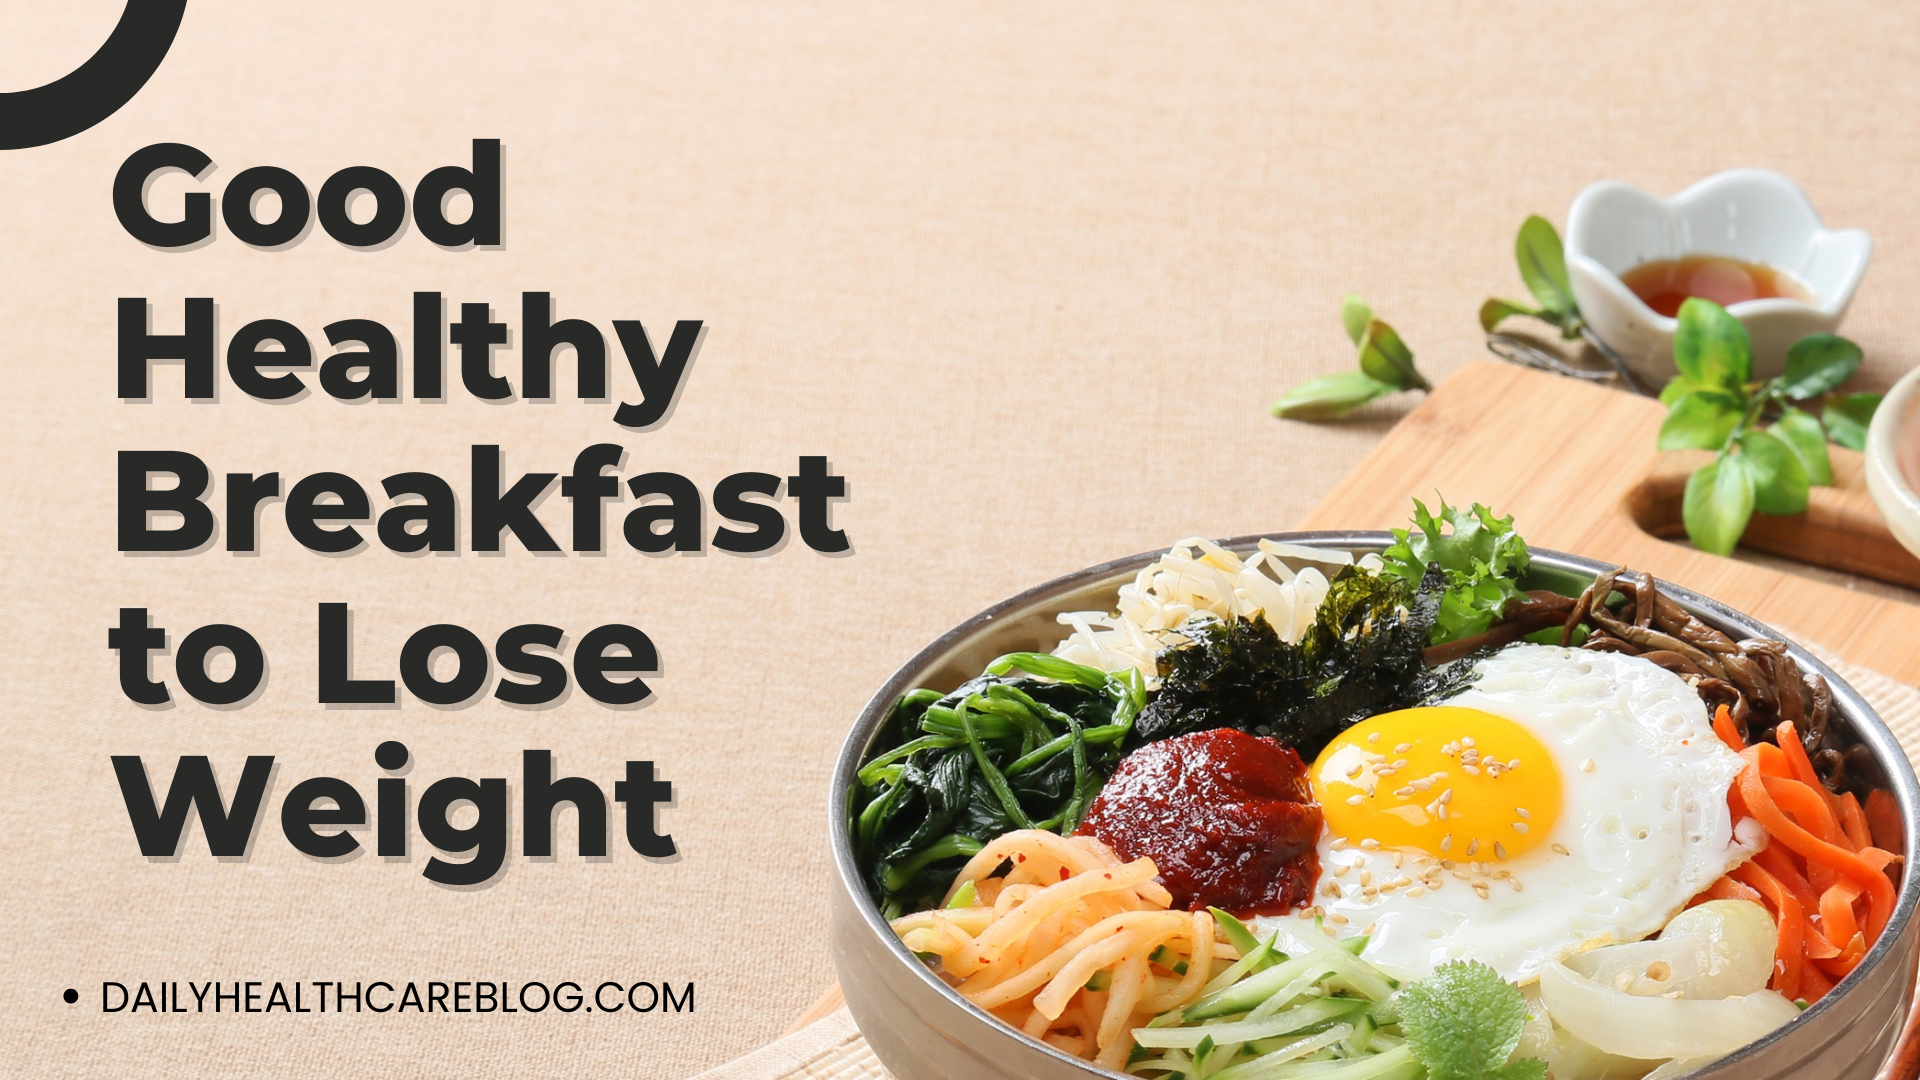 Good Healthy Breakfast to Lose Weight